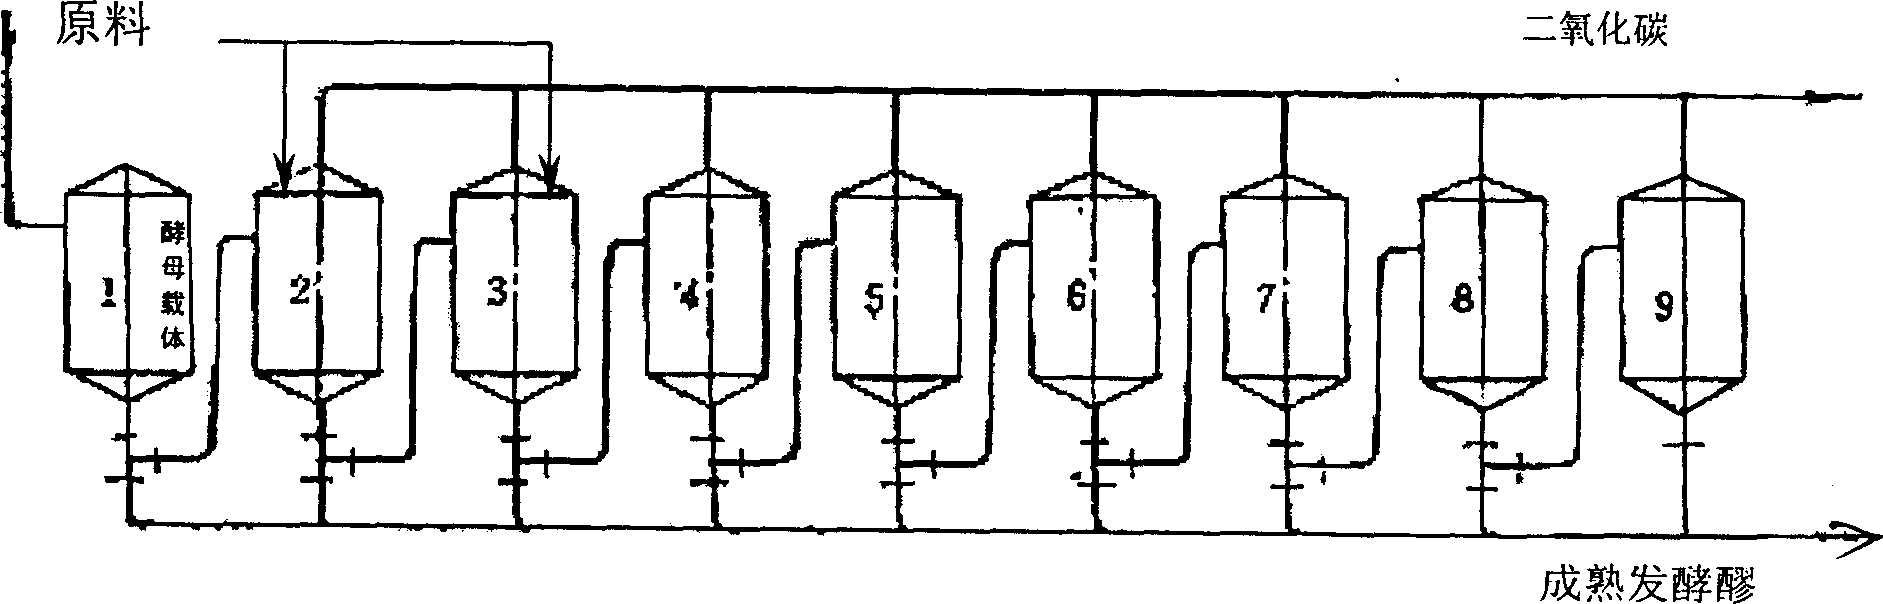 Production of alcohol by fermenting by yeast tolerant to high concentrated sugar and alcohol